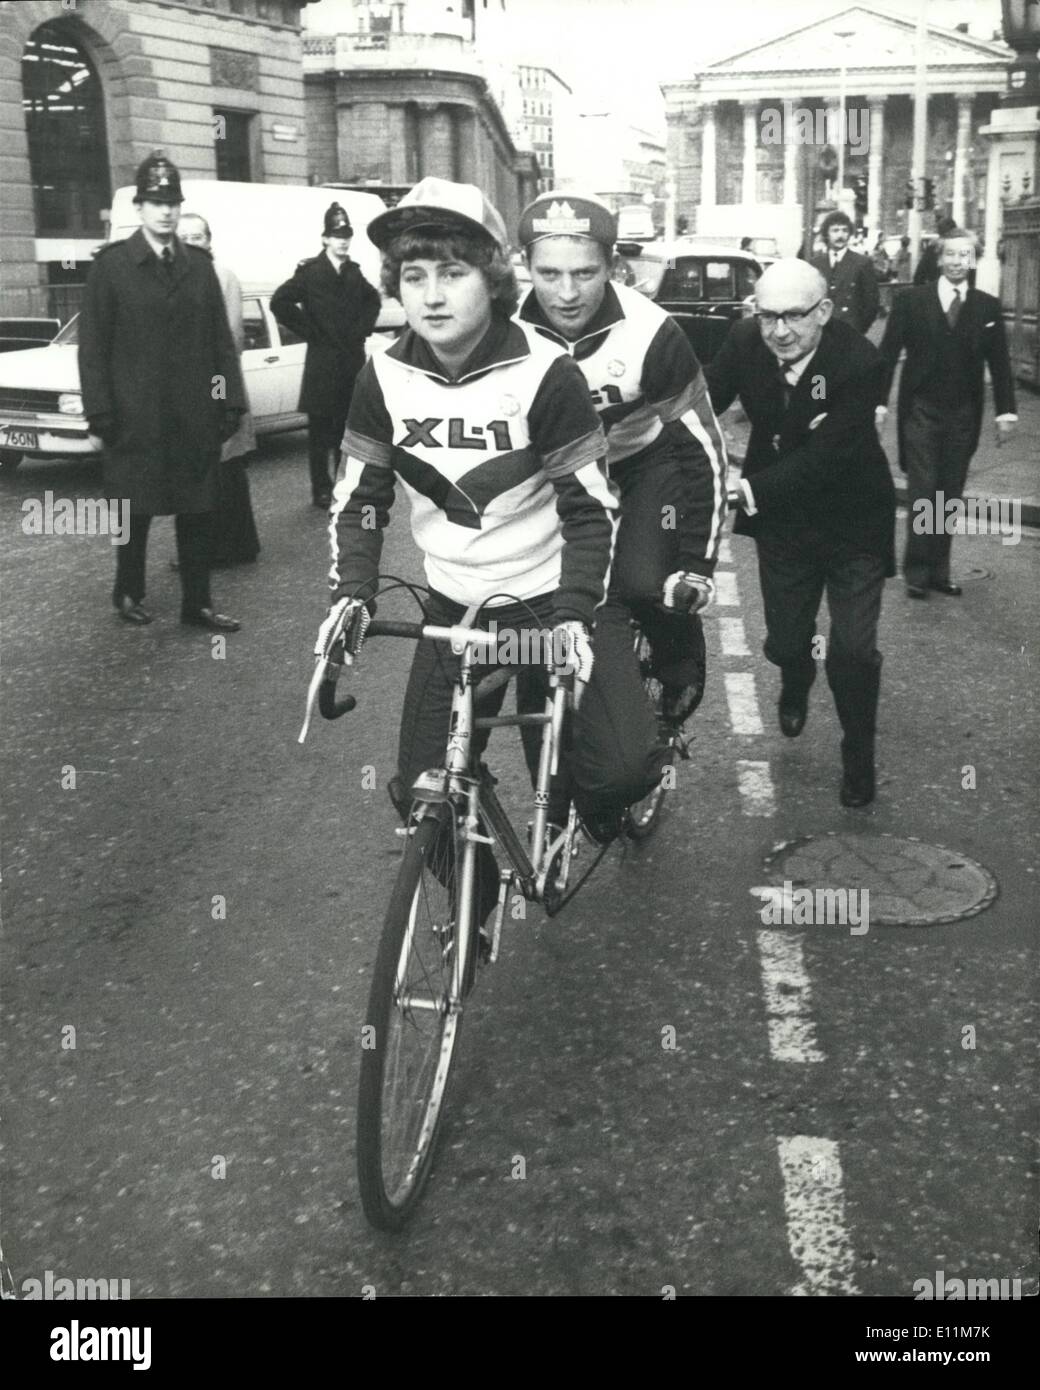 Feb. 02, 1979 - Around the World in 79 days by ' Biking Viking': The Lord Mayor of London Sir Kenneth Cork, launched ''The Biking Viking'', outside the Mansion House this evening They are 21-year-old Norwegian girl, Marit Voster, and her 25-year-old blind passenger, Tore Naerland, on their ''Around the World in 79 days on a bicycle built for two''. They will take the same routs as Phineas Fogg in Jules Verne's ''Around the World in 80 days'' . Their Journey will take them through France Stock Photo